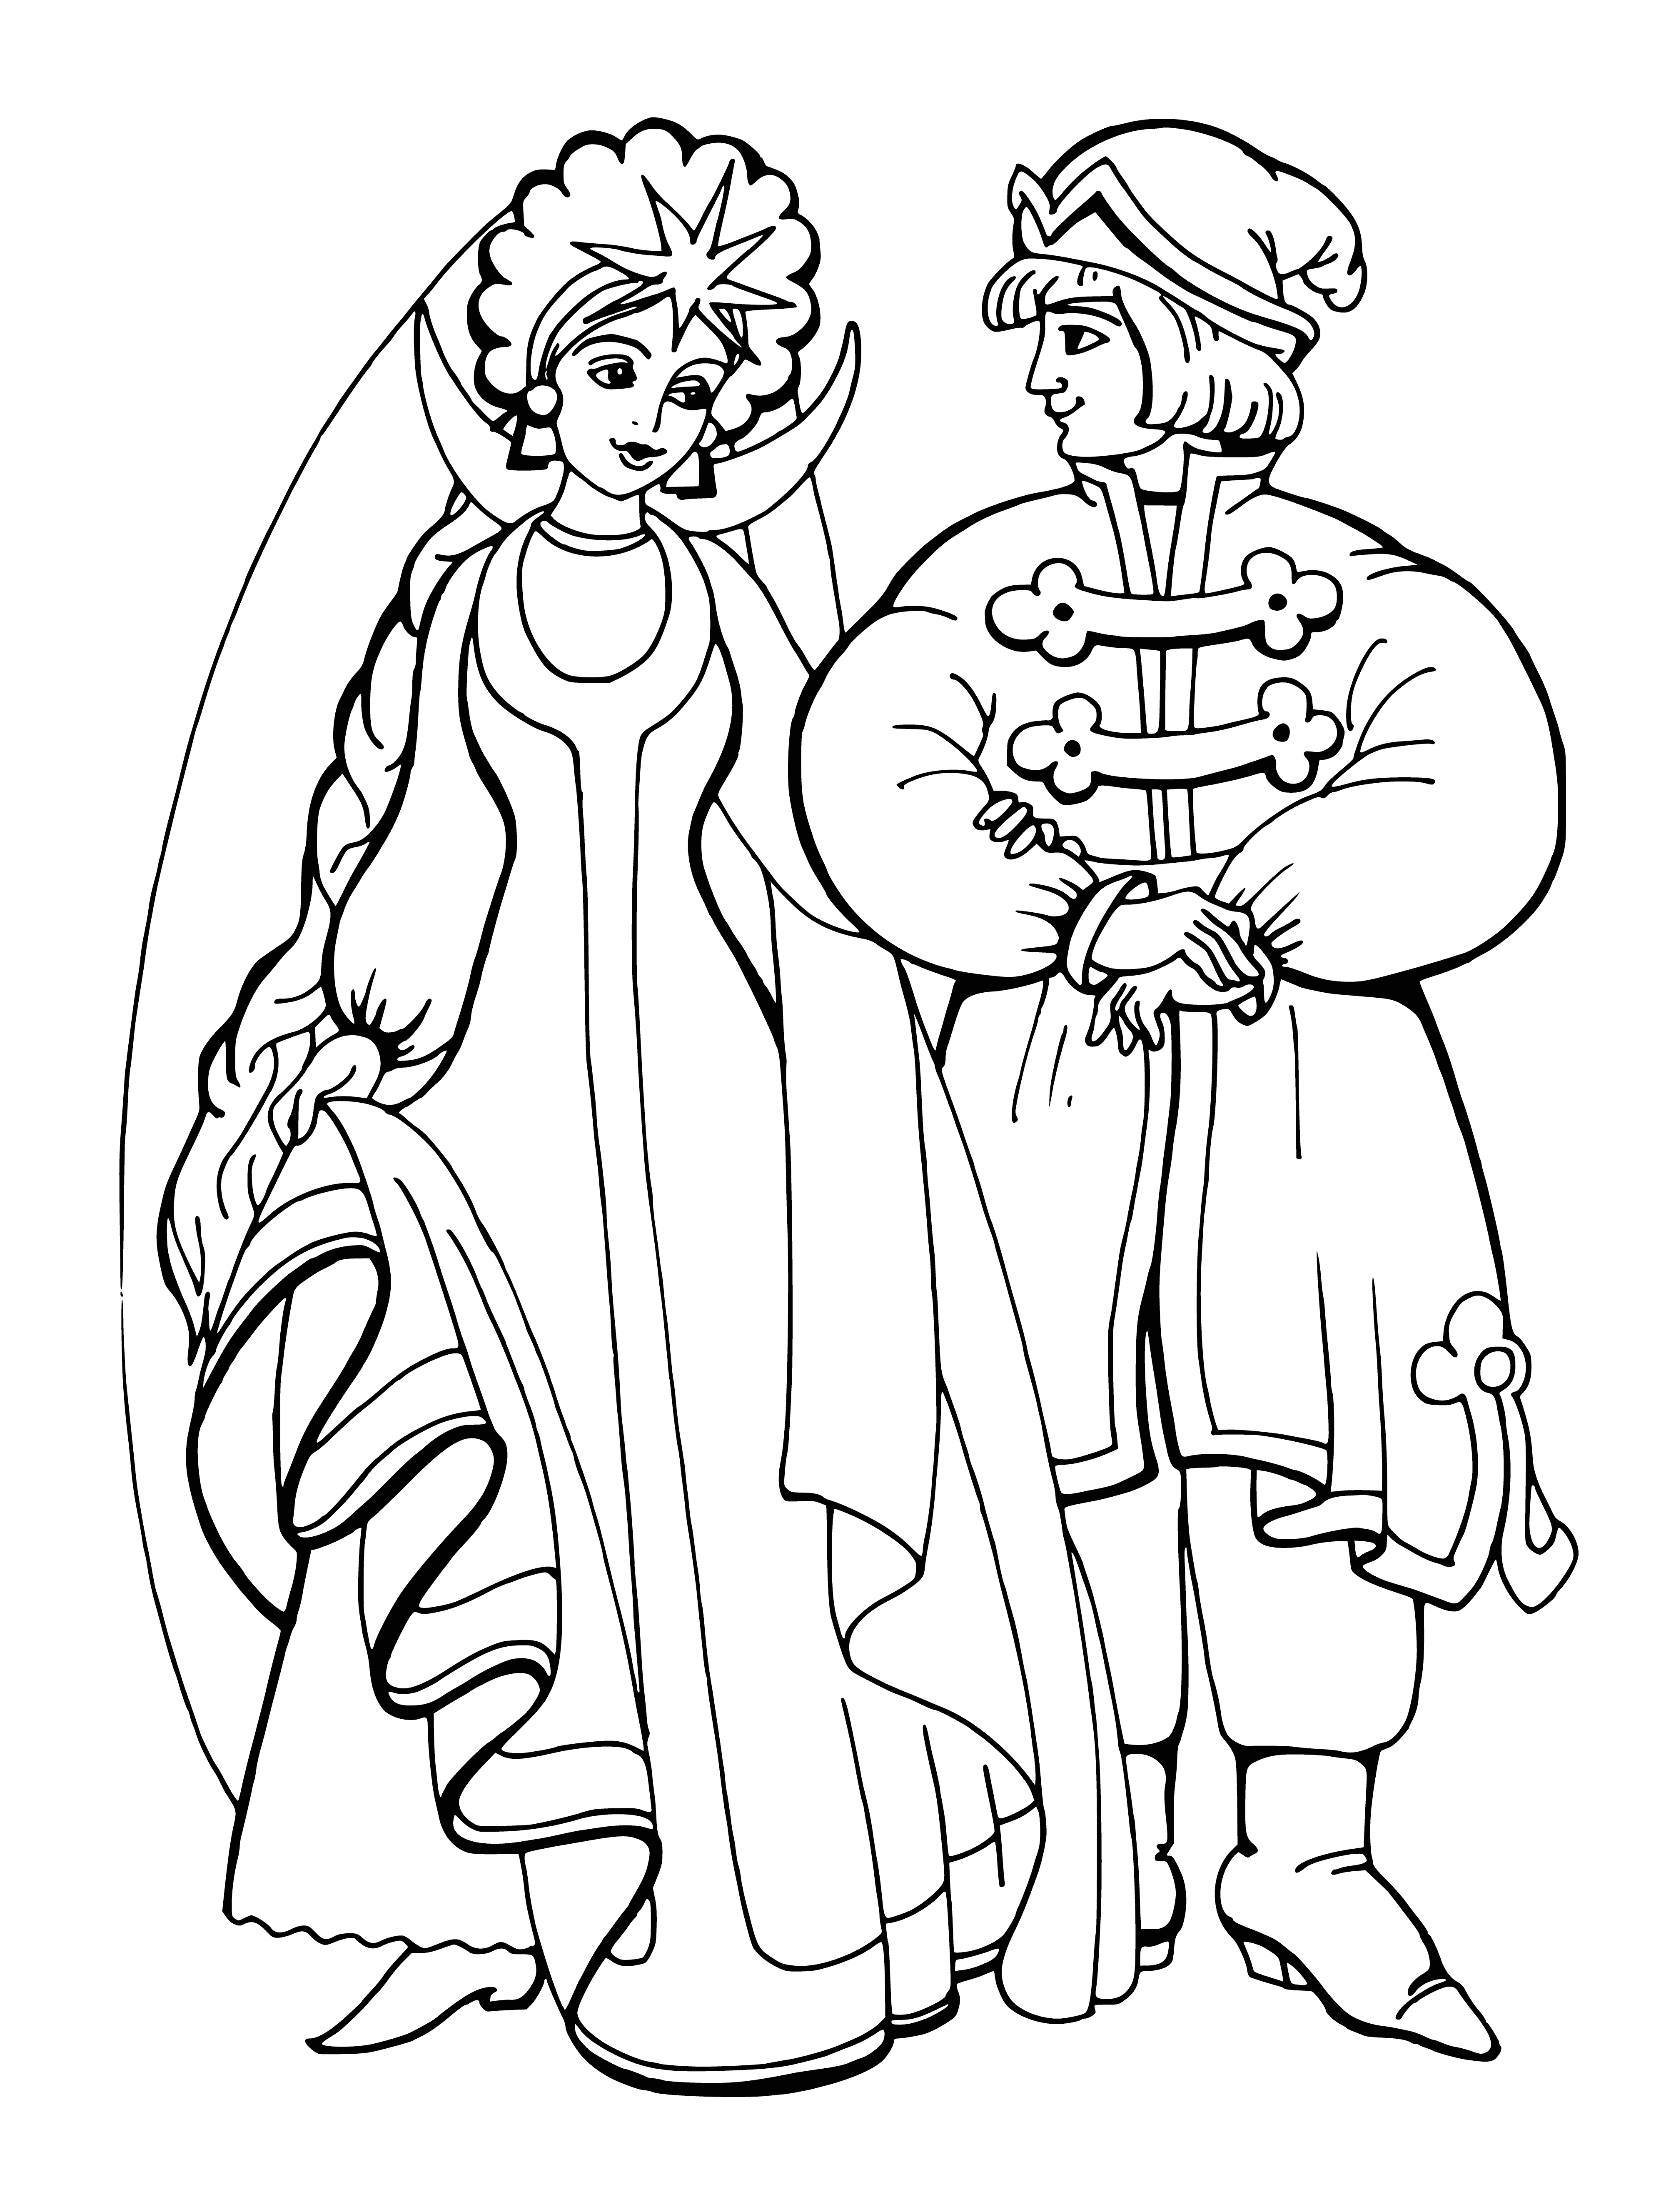 coloring page: Man & woman in Russian clothing lean close, admiring each other with love. Man has mustache, woman wears flowered headdress. #love